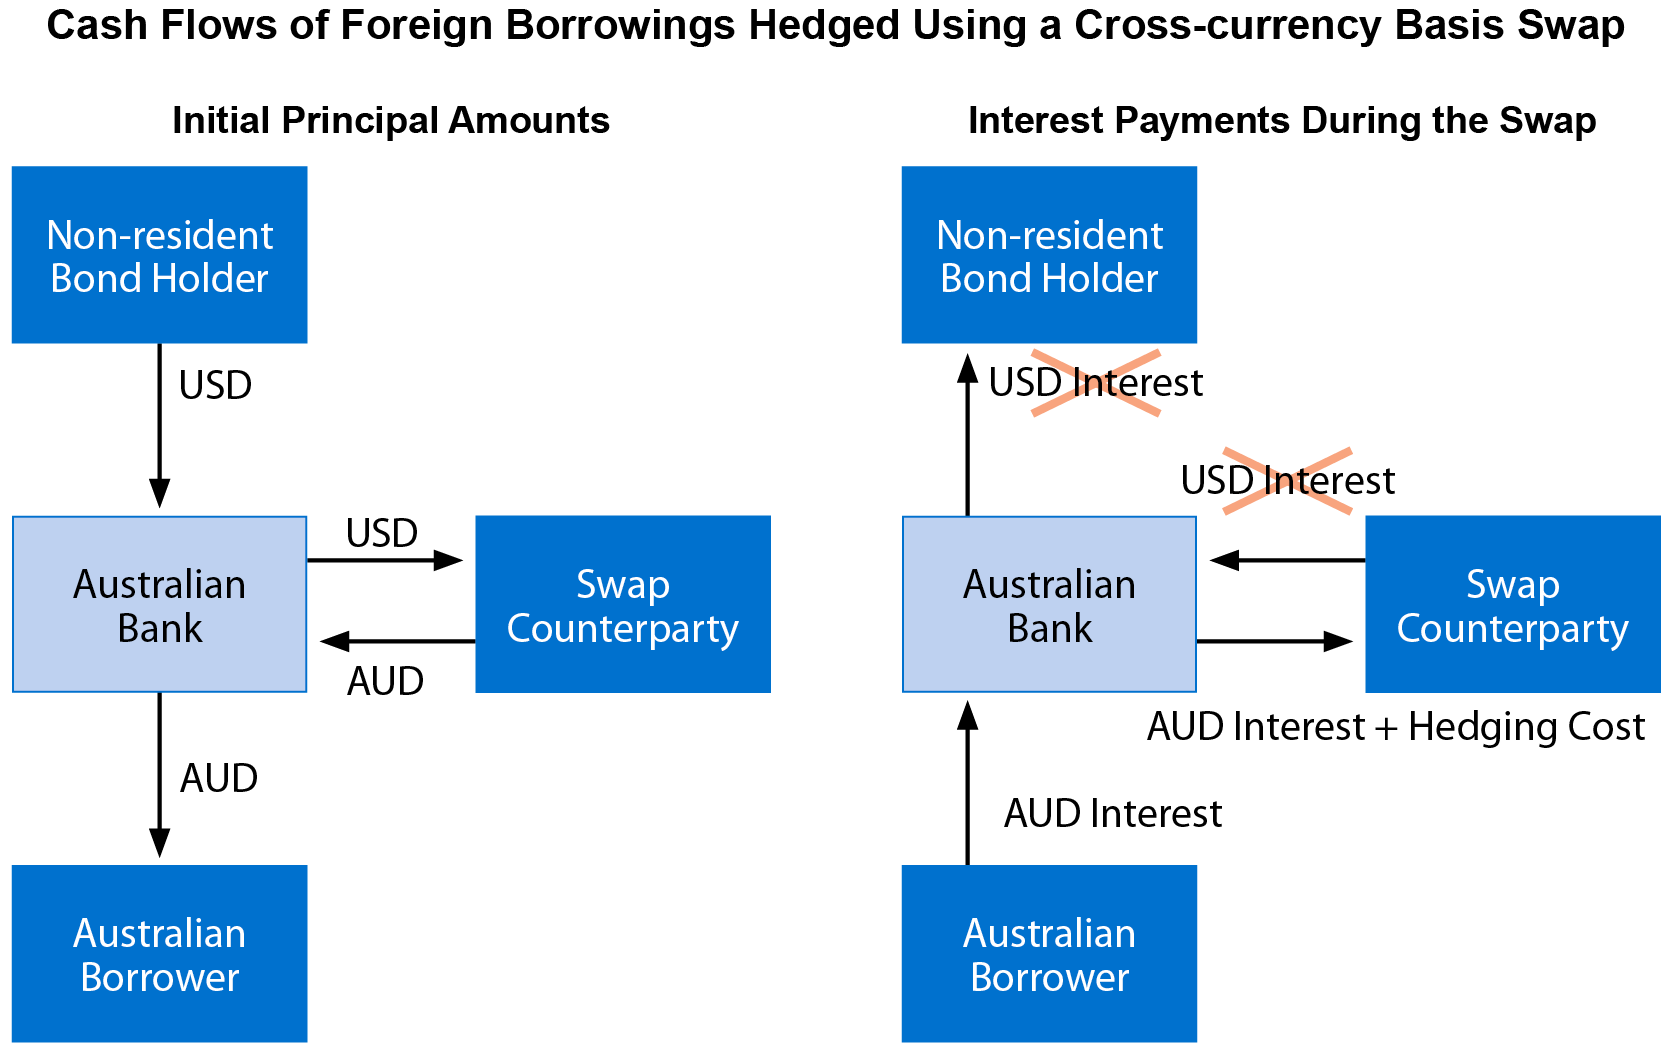 Figure 1: Cash flows of foreign borrowings hedged using a cross-currency basis swap; described in the paragraphs preceding this image.